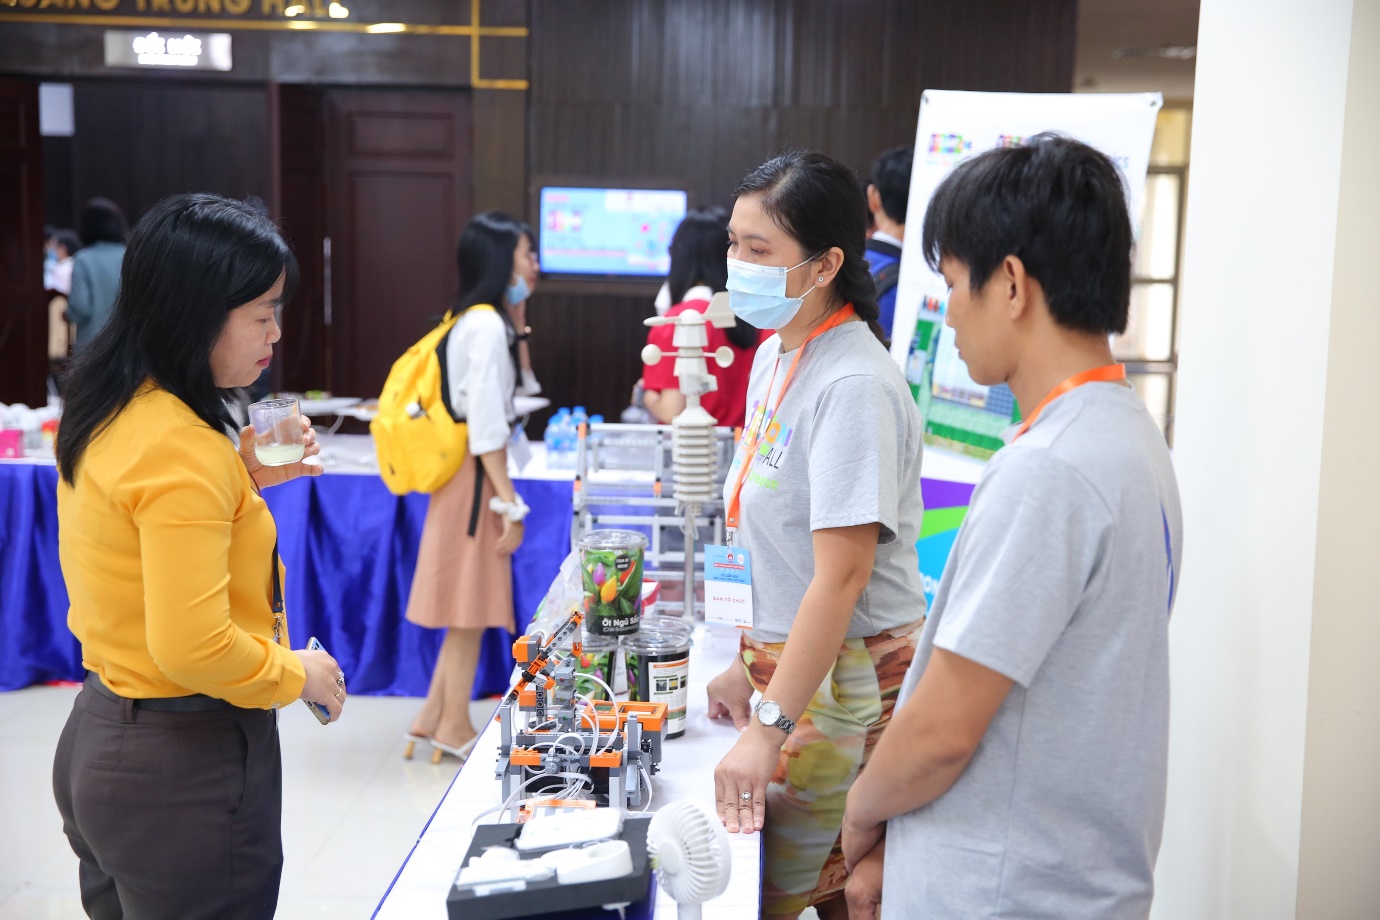 Showcase of innovative teaching and learning products, applications